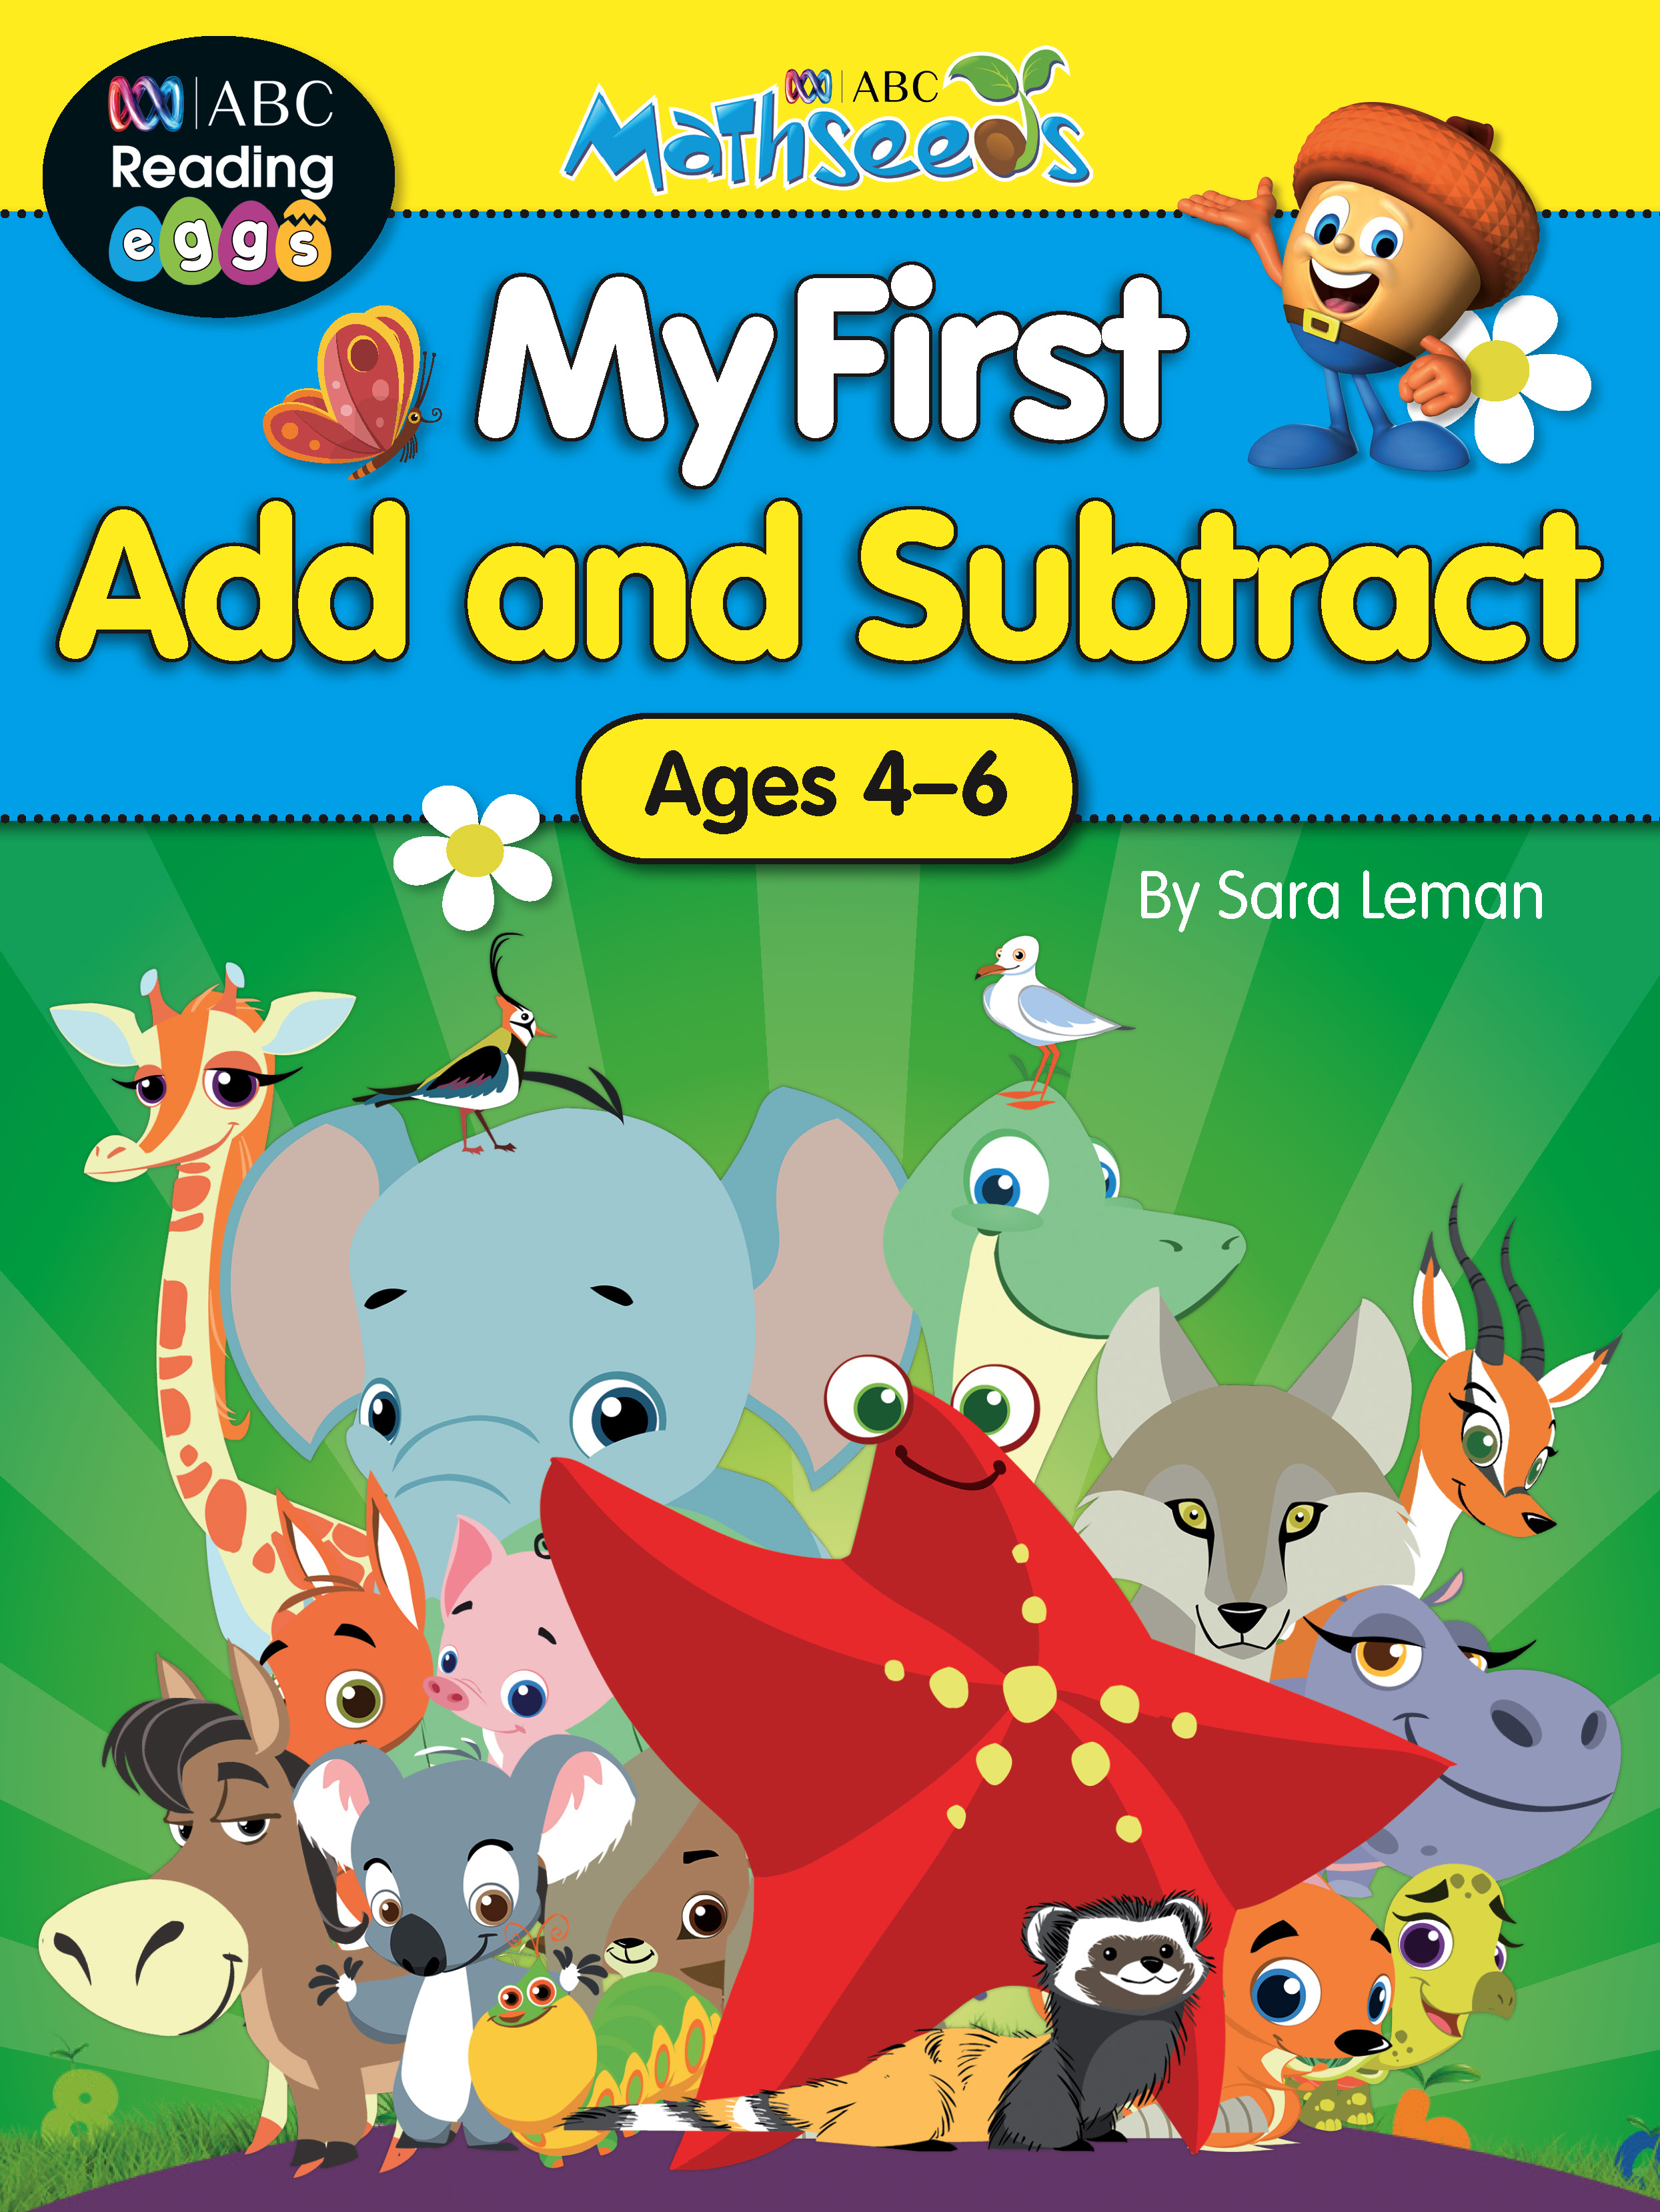 Picture of ABC Mathseeds My First Addition and Subtraction Activity Book